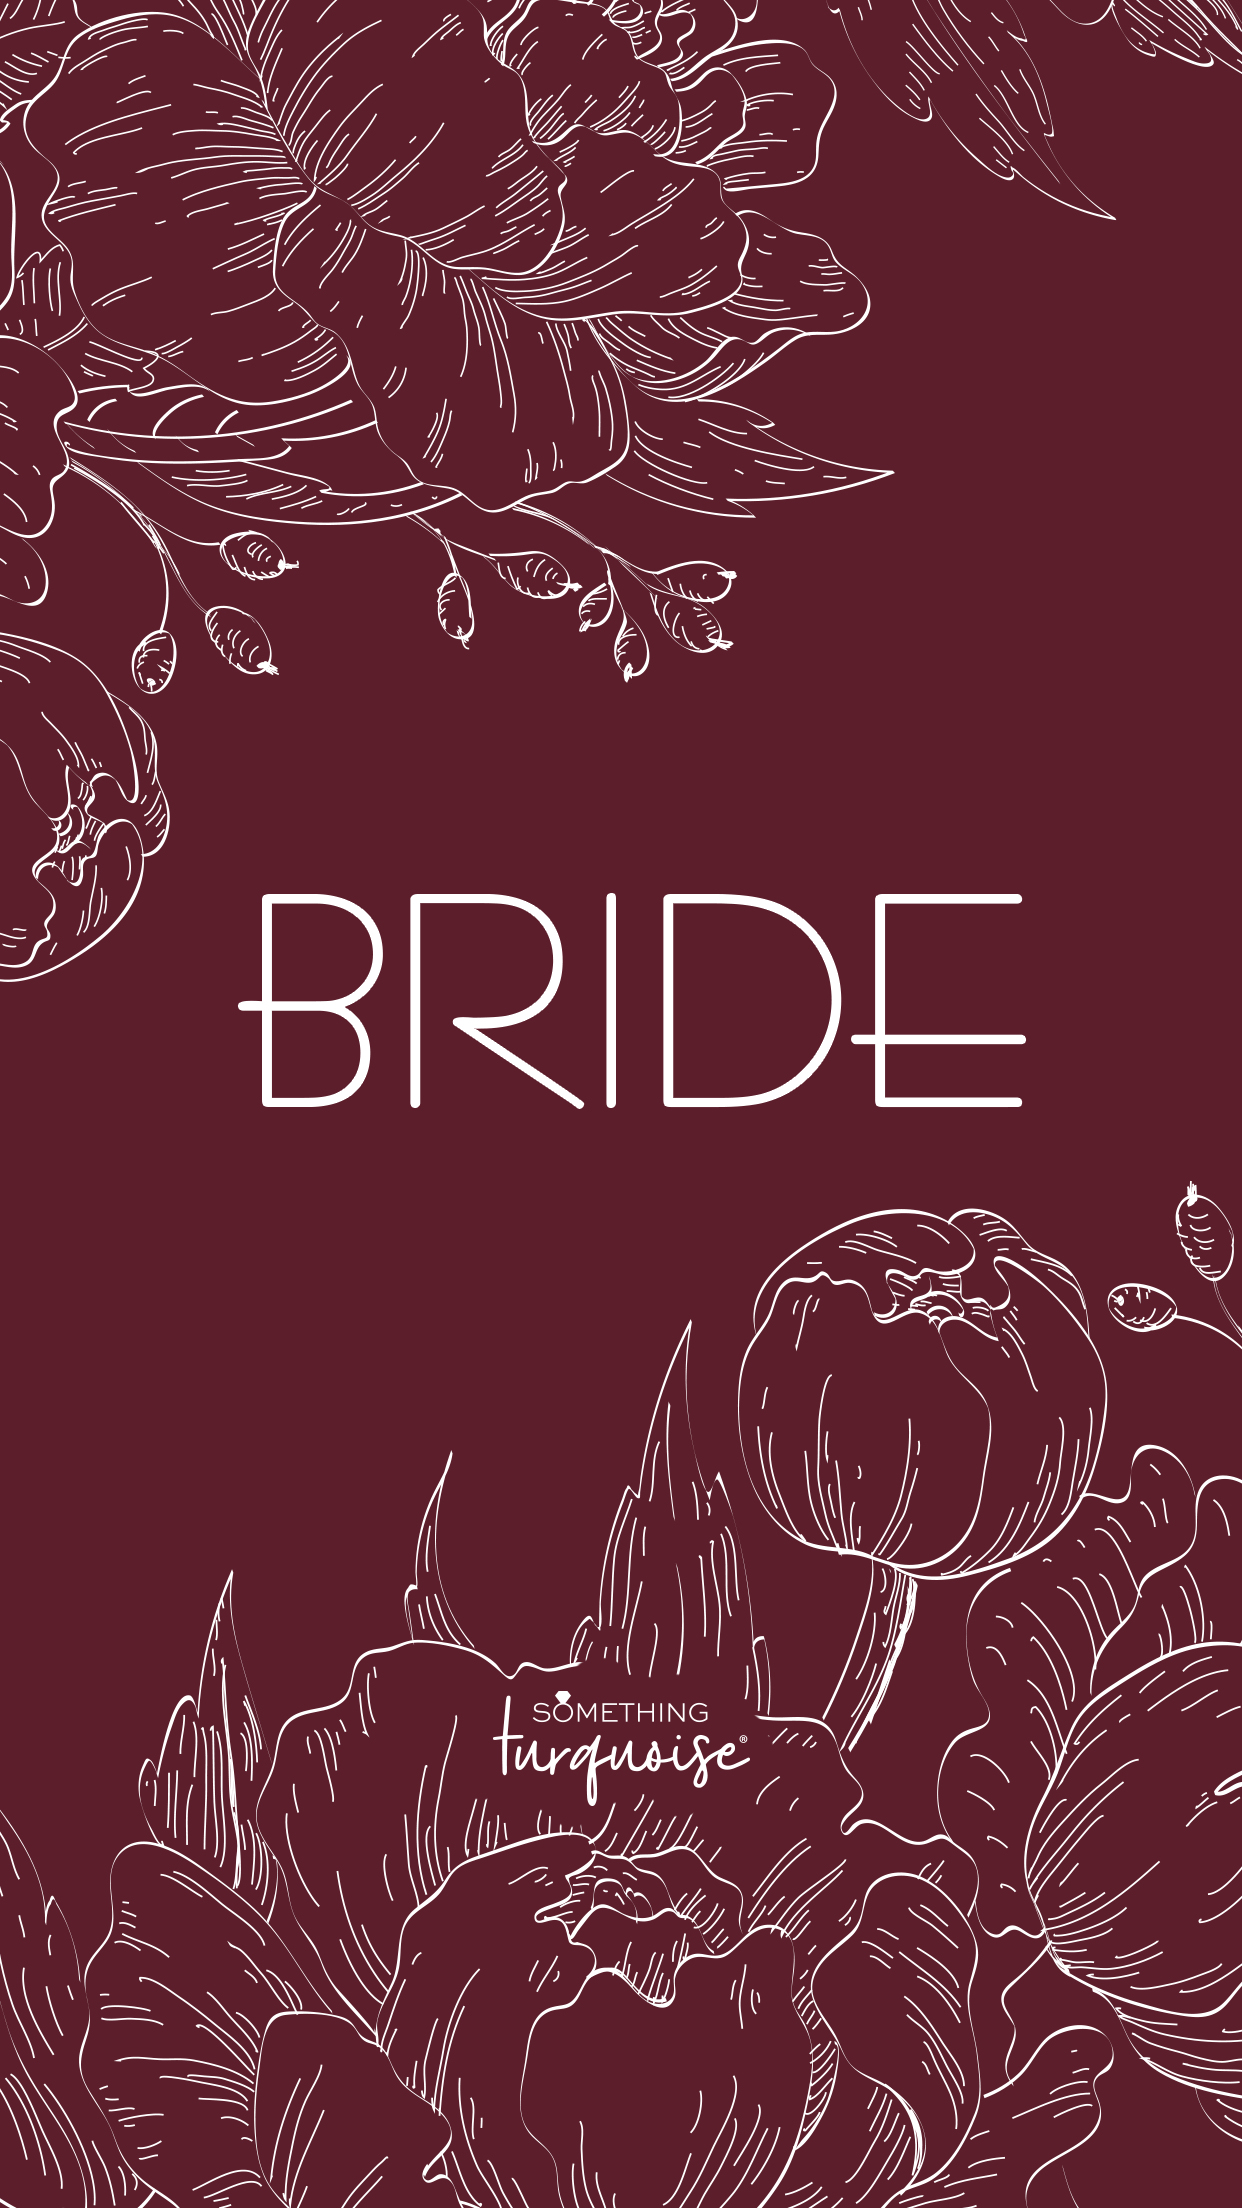 Free floral phone wallpaper for the Bride!